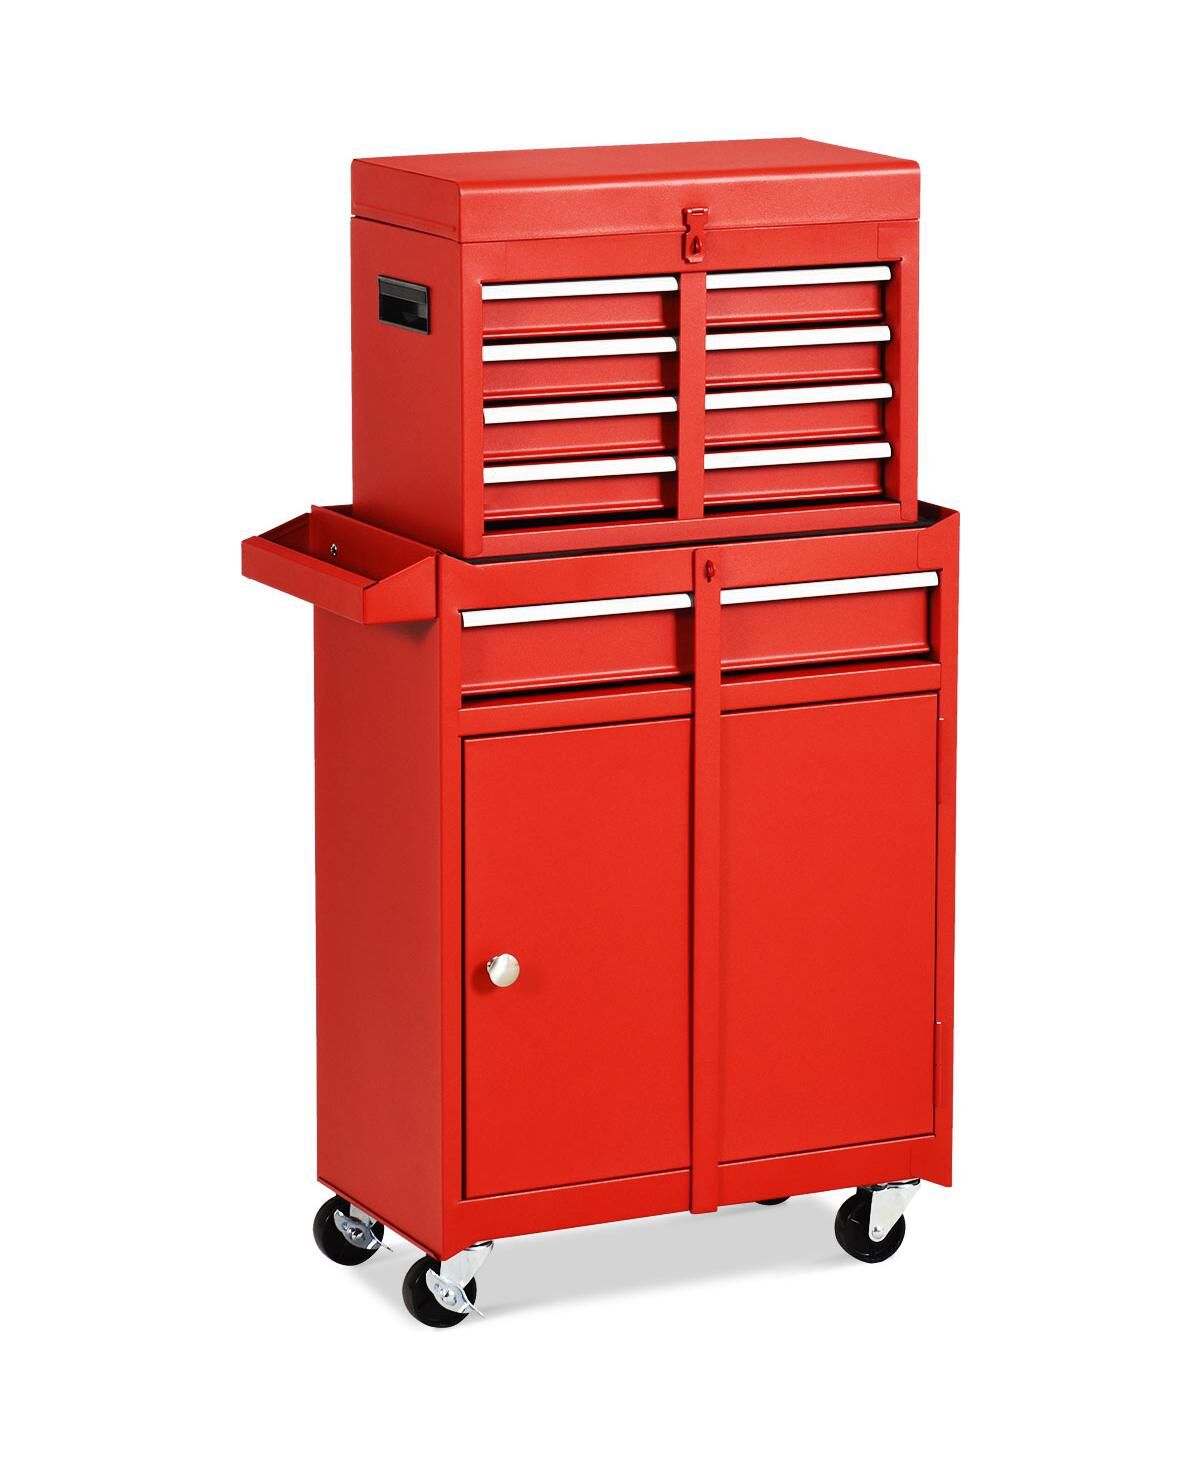 Costway 2 in 1 Tool Chest & Cabinet with 5 Sliding Drawers Rolling Garage Box Organizer - Red